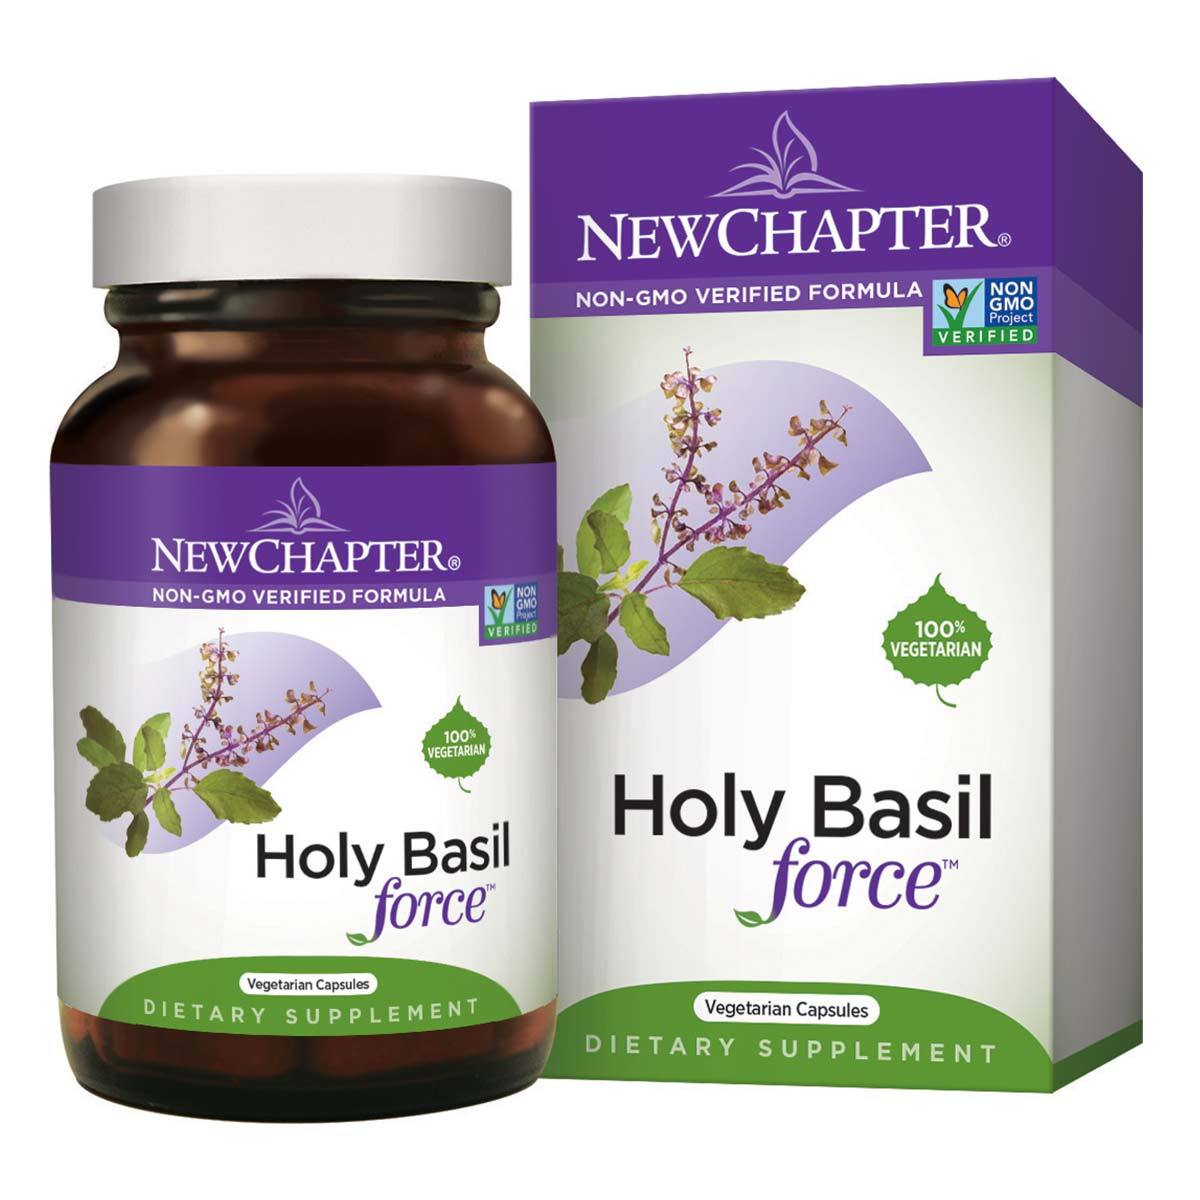 Primary image of Supercritical Holy Basil Force